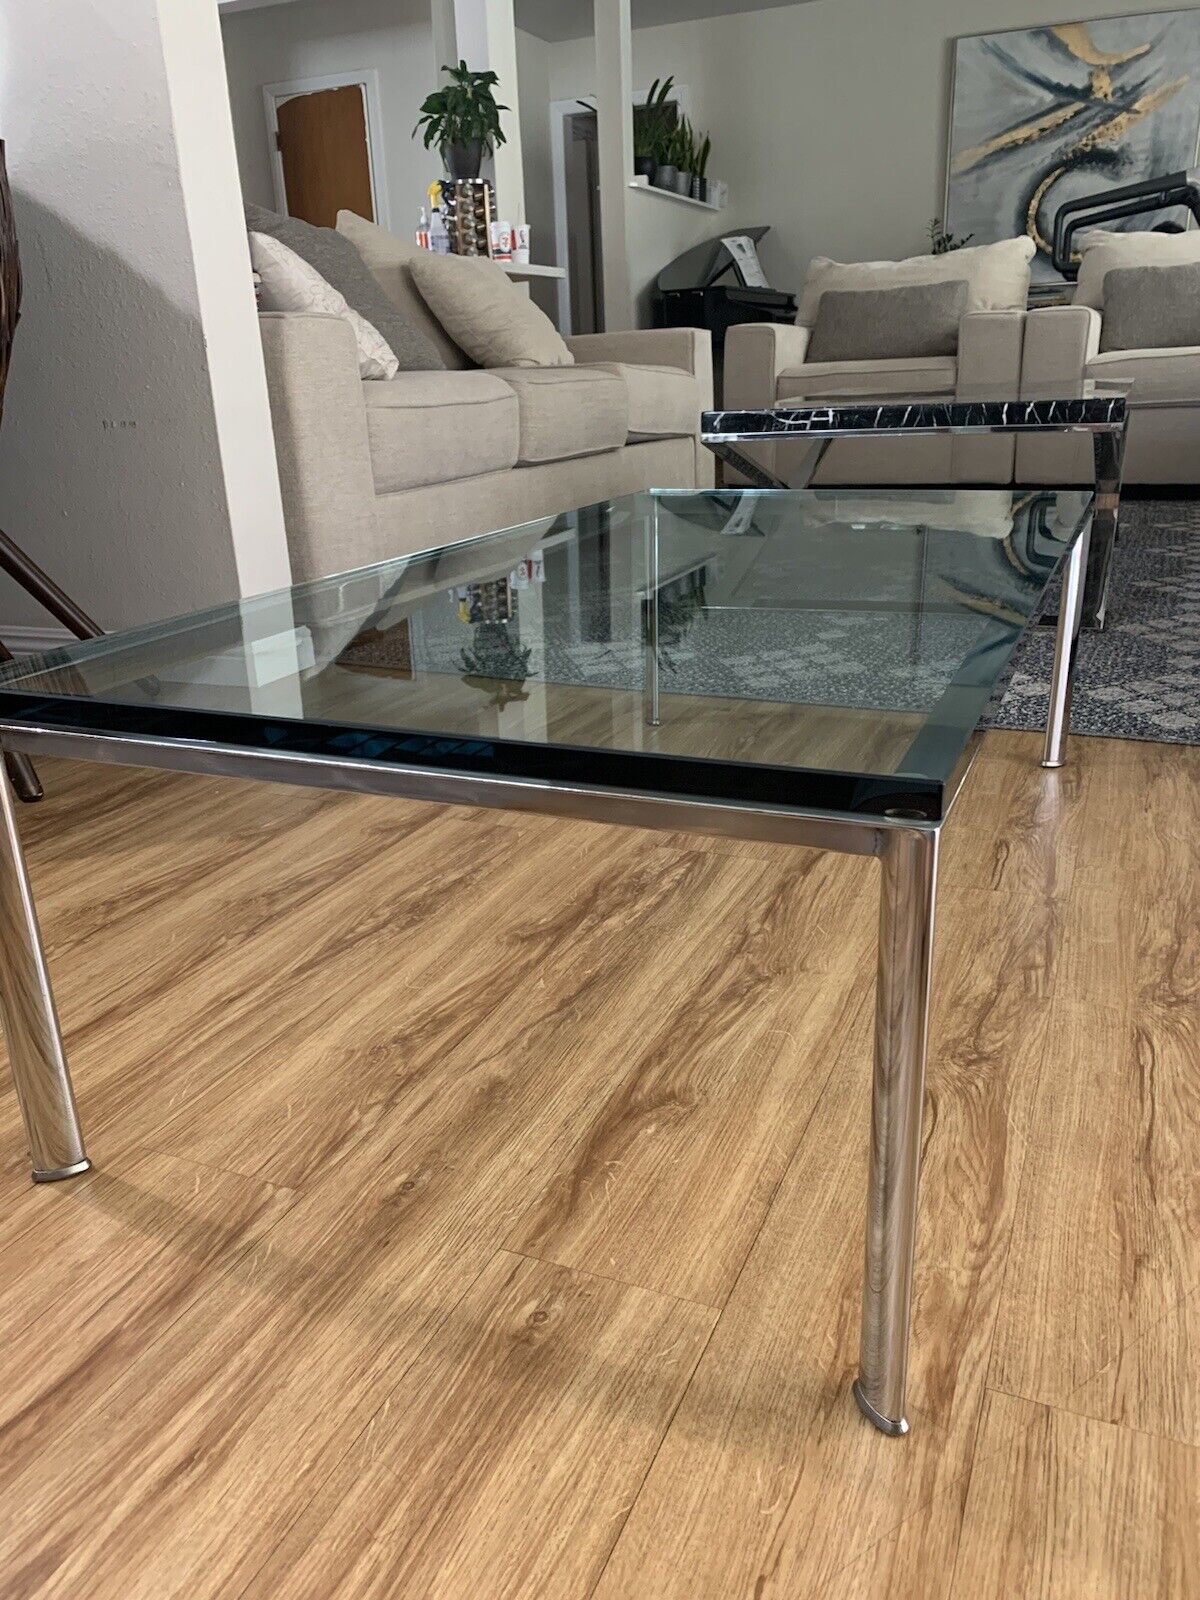 Ja Landbrugs Udholdenhed Florence Knoll Style Coffee Table in Glass and Chrome | eBay